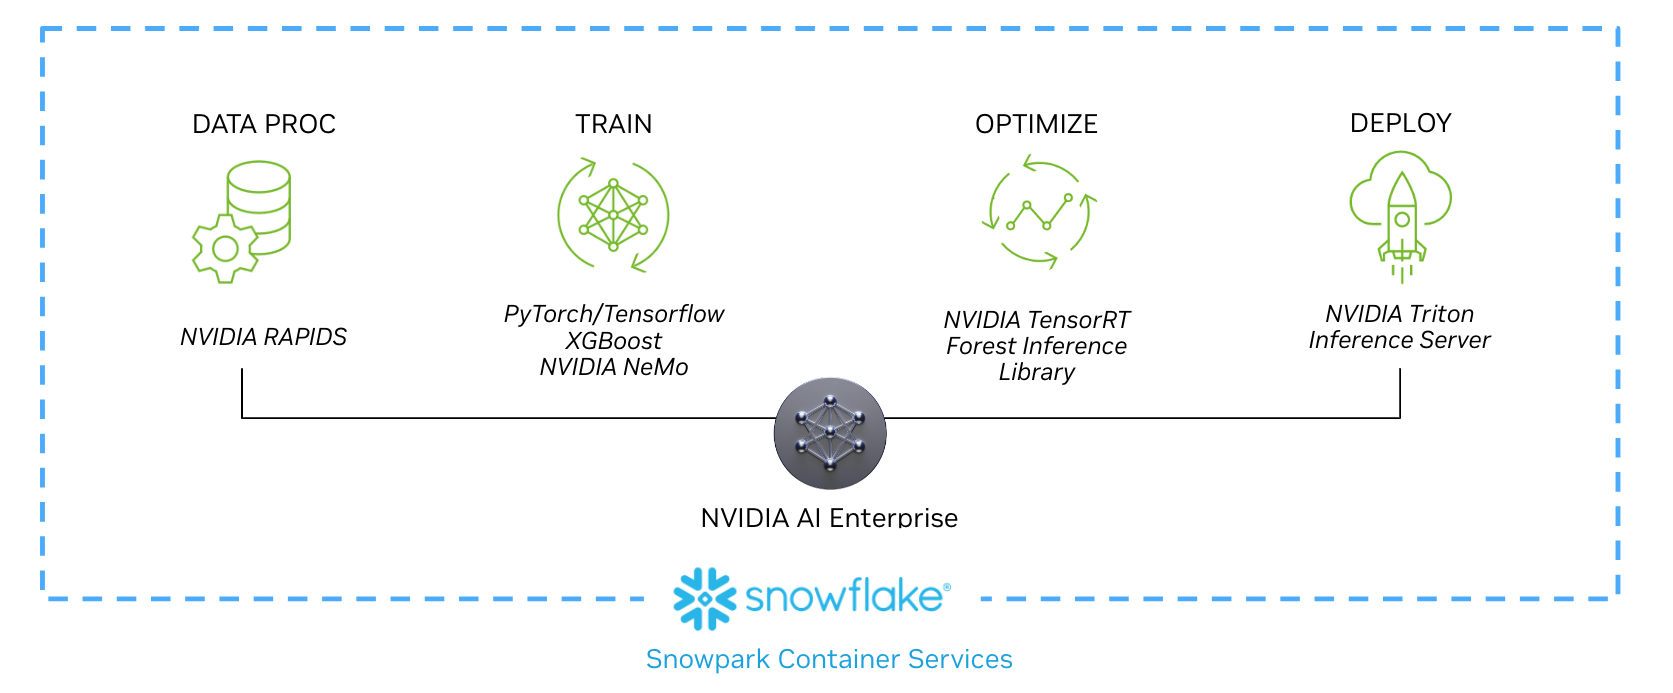 A representation of a data science workflow on Snowpark Container Services showing the process from data processing to training to optimizing to deploying.